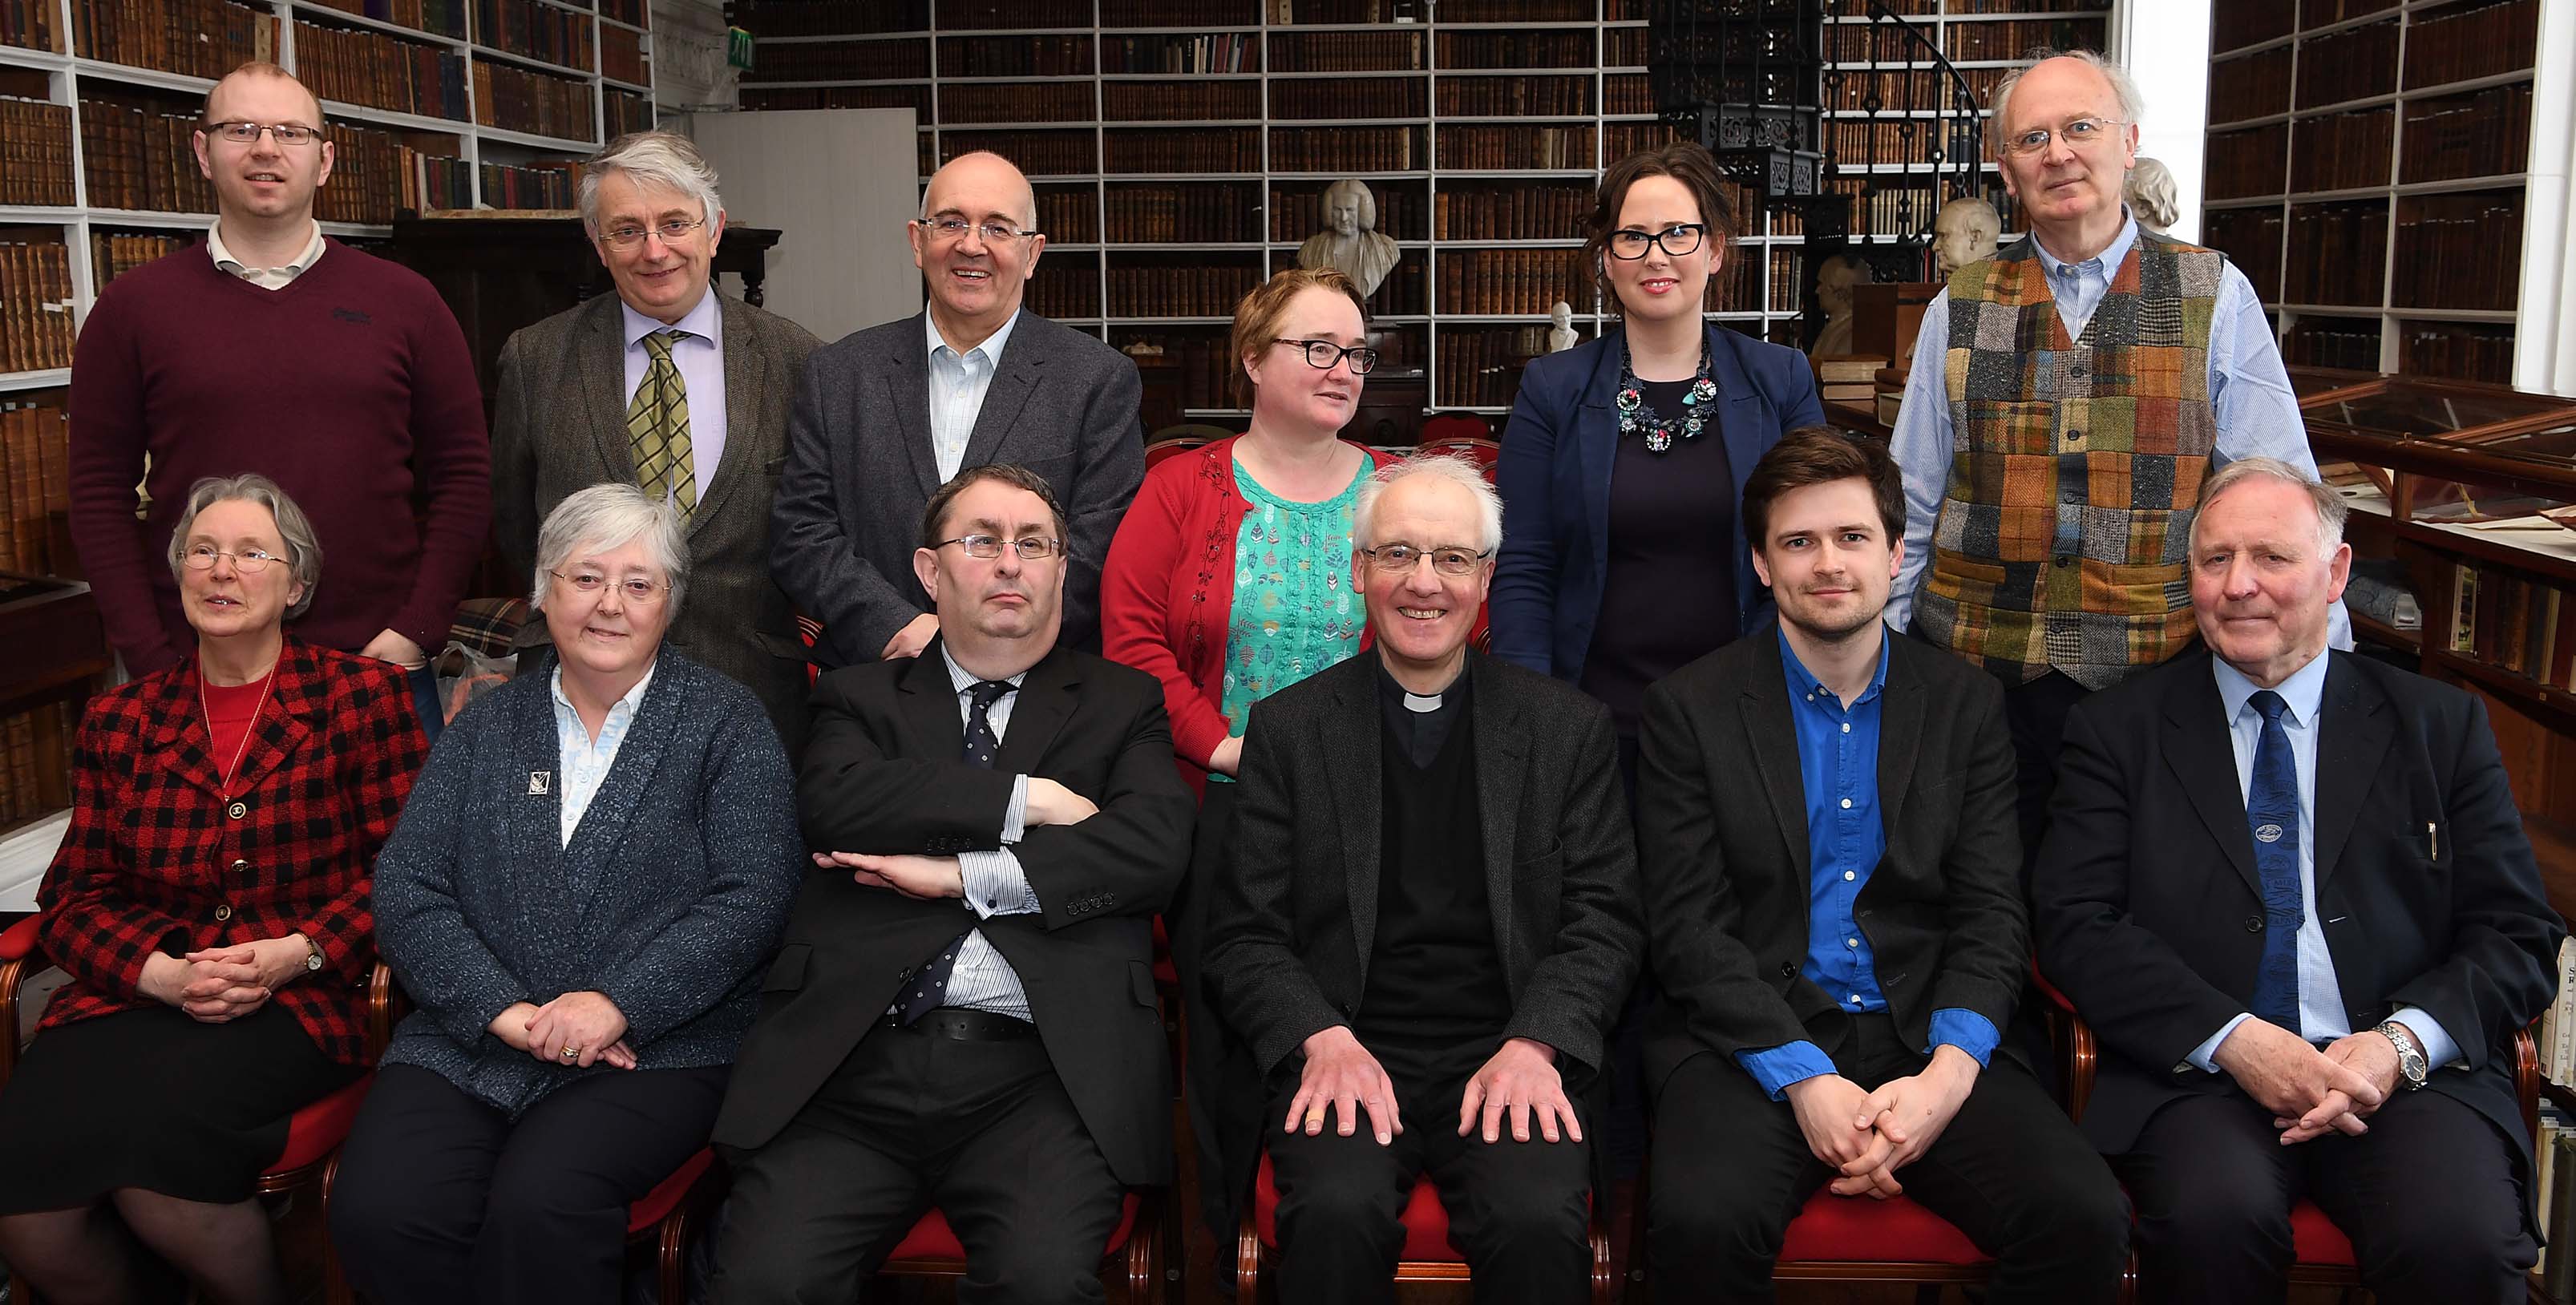 [Back row: from left to right] Dr Mark Empey, Mr George Woodman, Professor David Hayton, Dr Miriam Moffit, Dr Jennifer Redmond, Mr Brendan Toomey (COIHS committee members) [Front row: from left to right] Ms Valerie Adams, Dr Jane McKee, Mr Colin Armstrong, Very Revd Gregory Dunston, Mr Ruairí Cullen and Dr Adrian Empey (COIHS Hon Sec) Photo courtesy of Ian Maginess